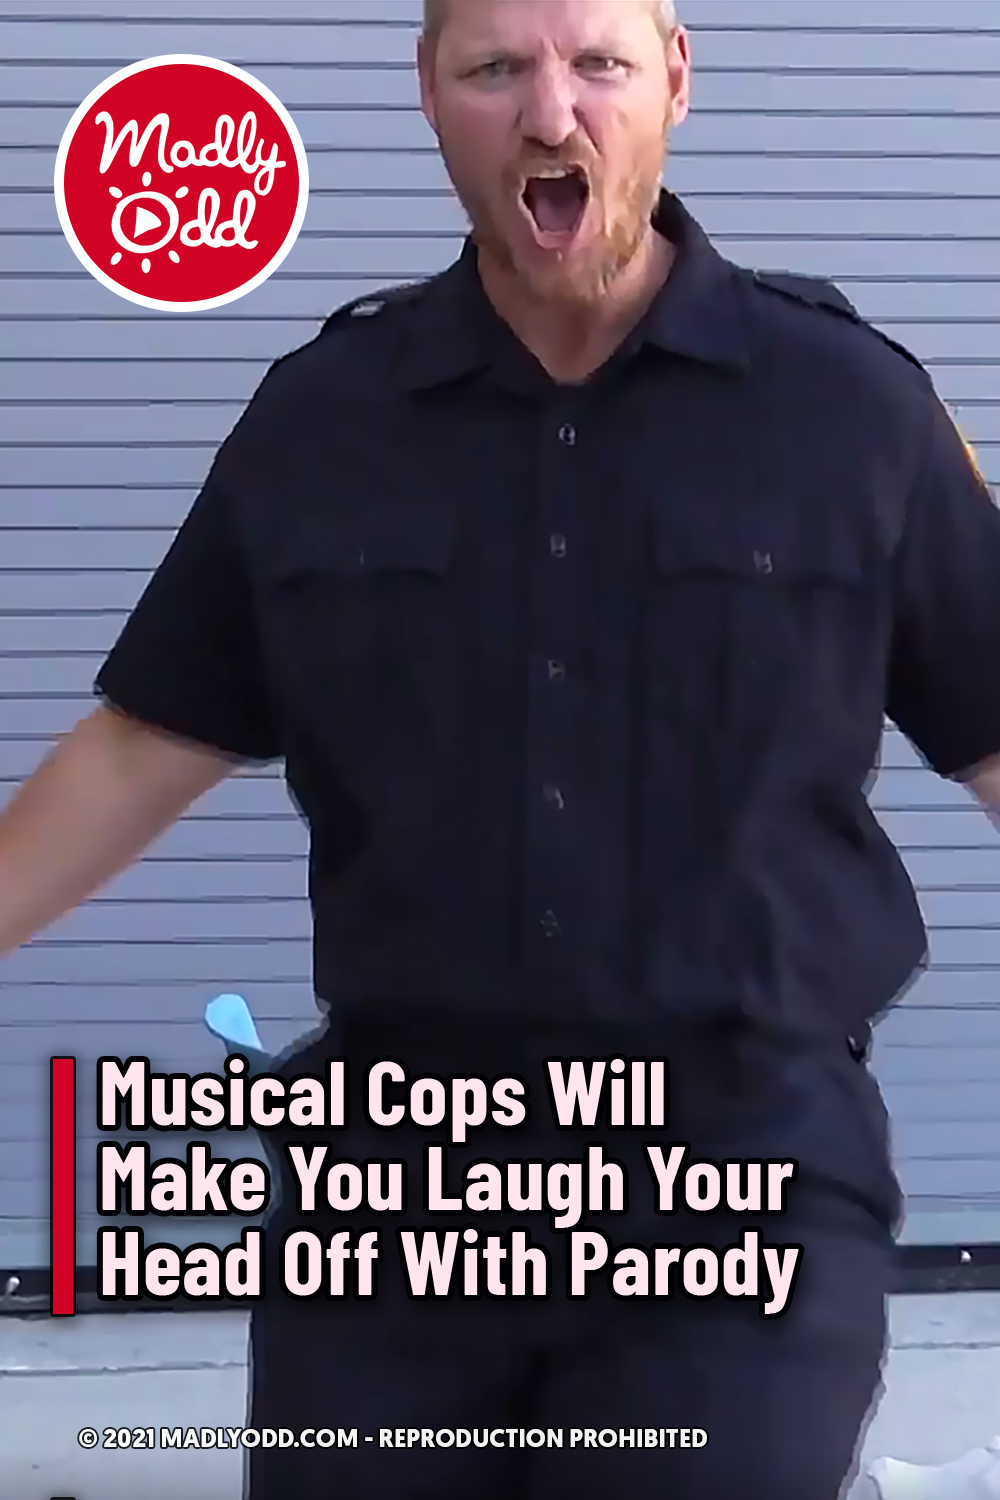 Musical Cops Will Make You Laugh Your Head Off With Parody